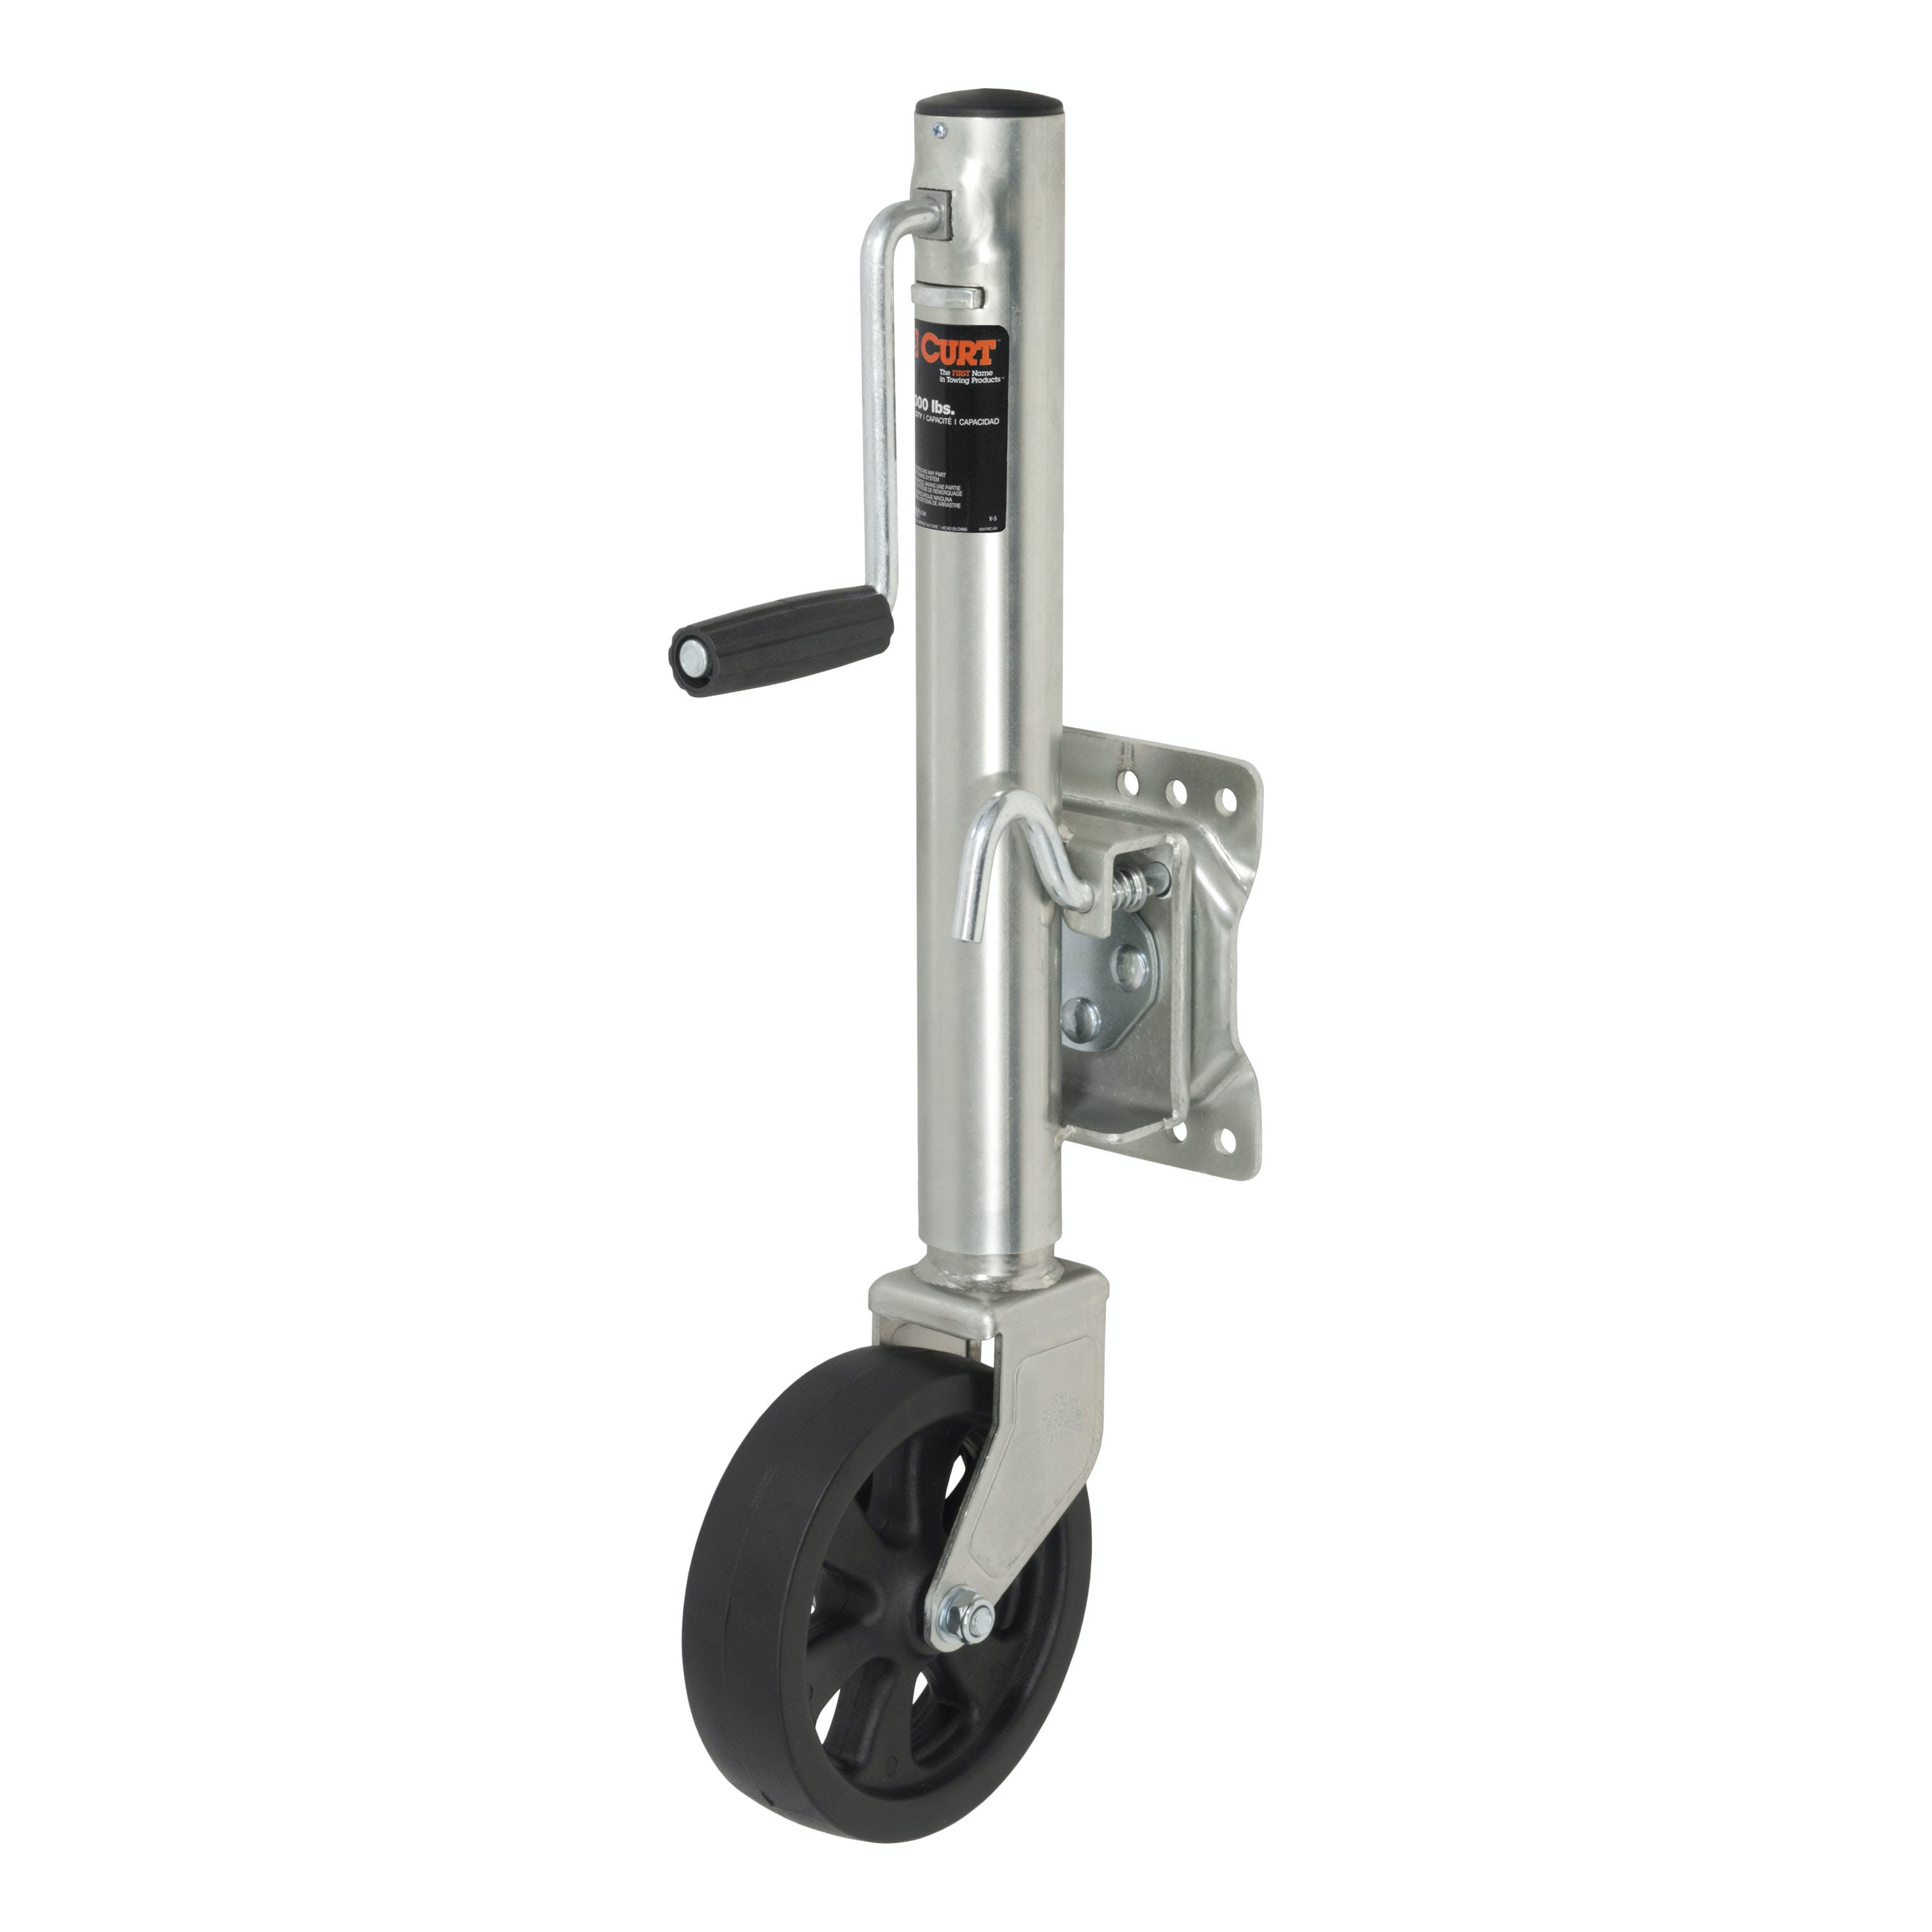 CURT 28116 Marine Jack with 8 Wheel (1,500 lbs, 10 Travel, Packaged)